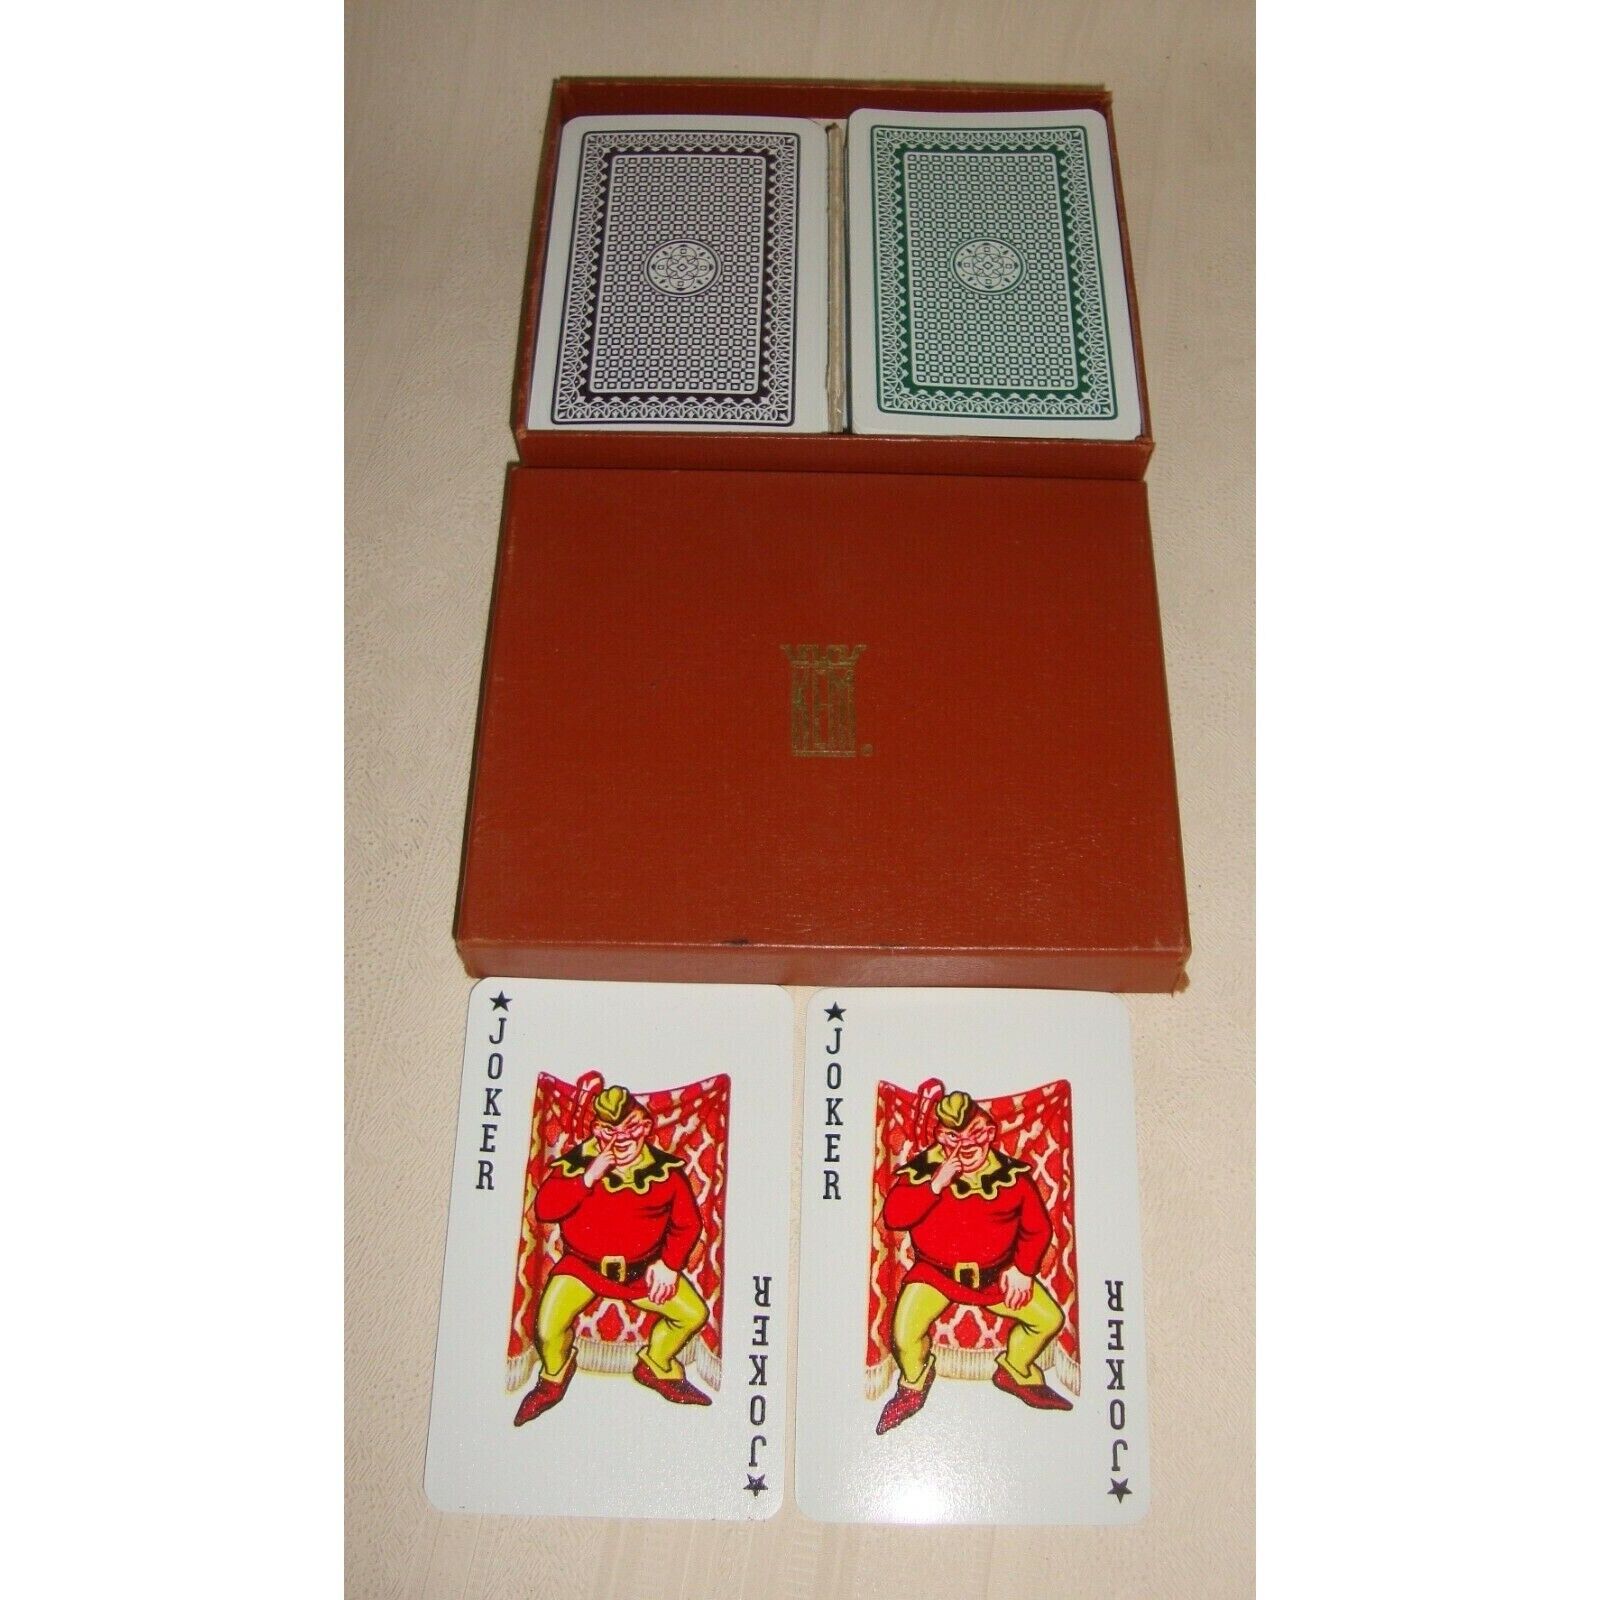 Vintage Double Deck KEM Plastic Coated Playing Cards Copyright 1935 